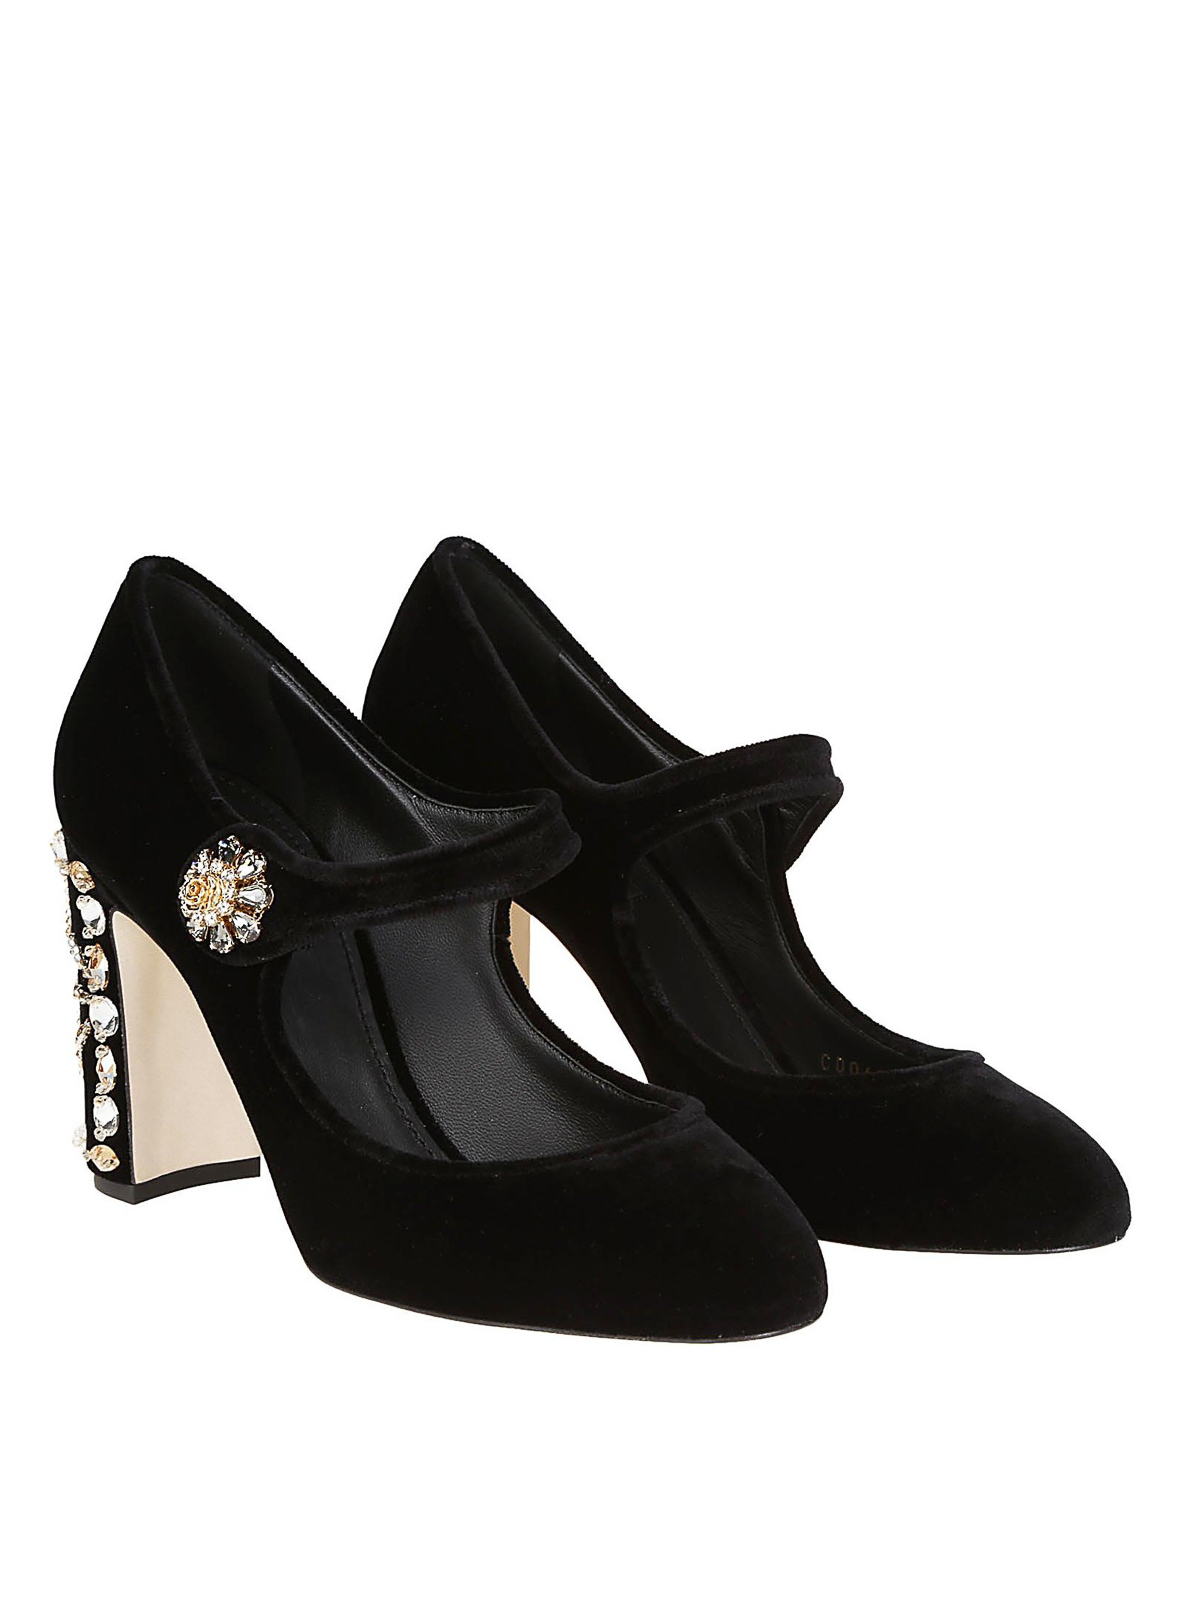 dolce and gabbana mary jane shoes